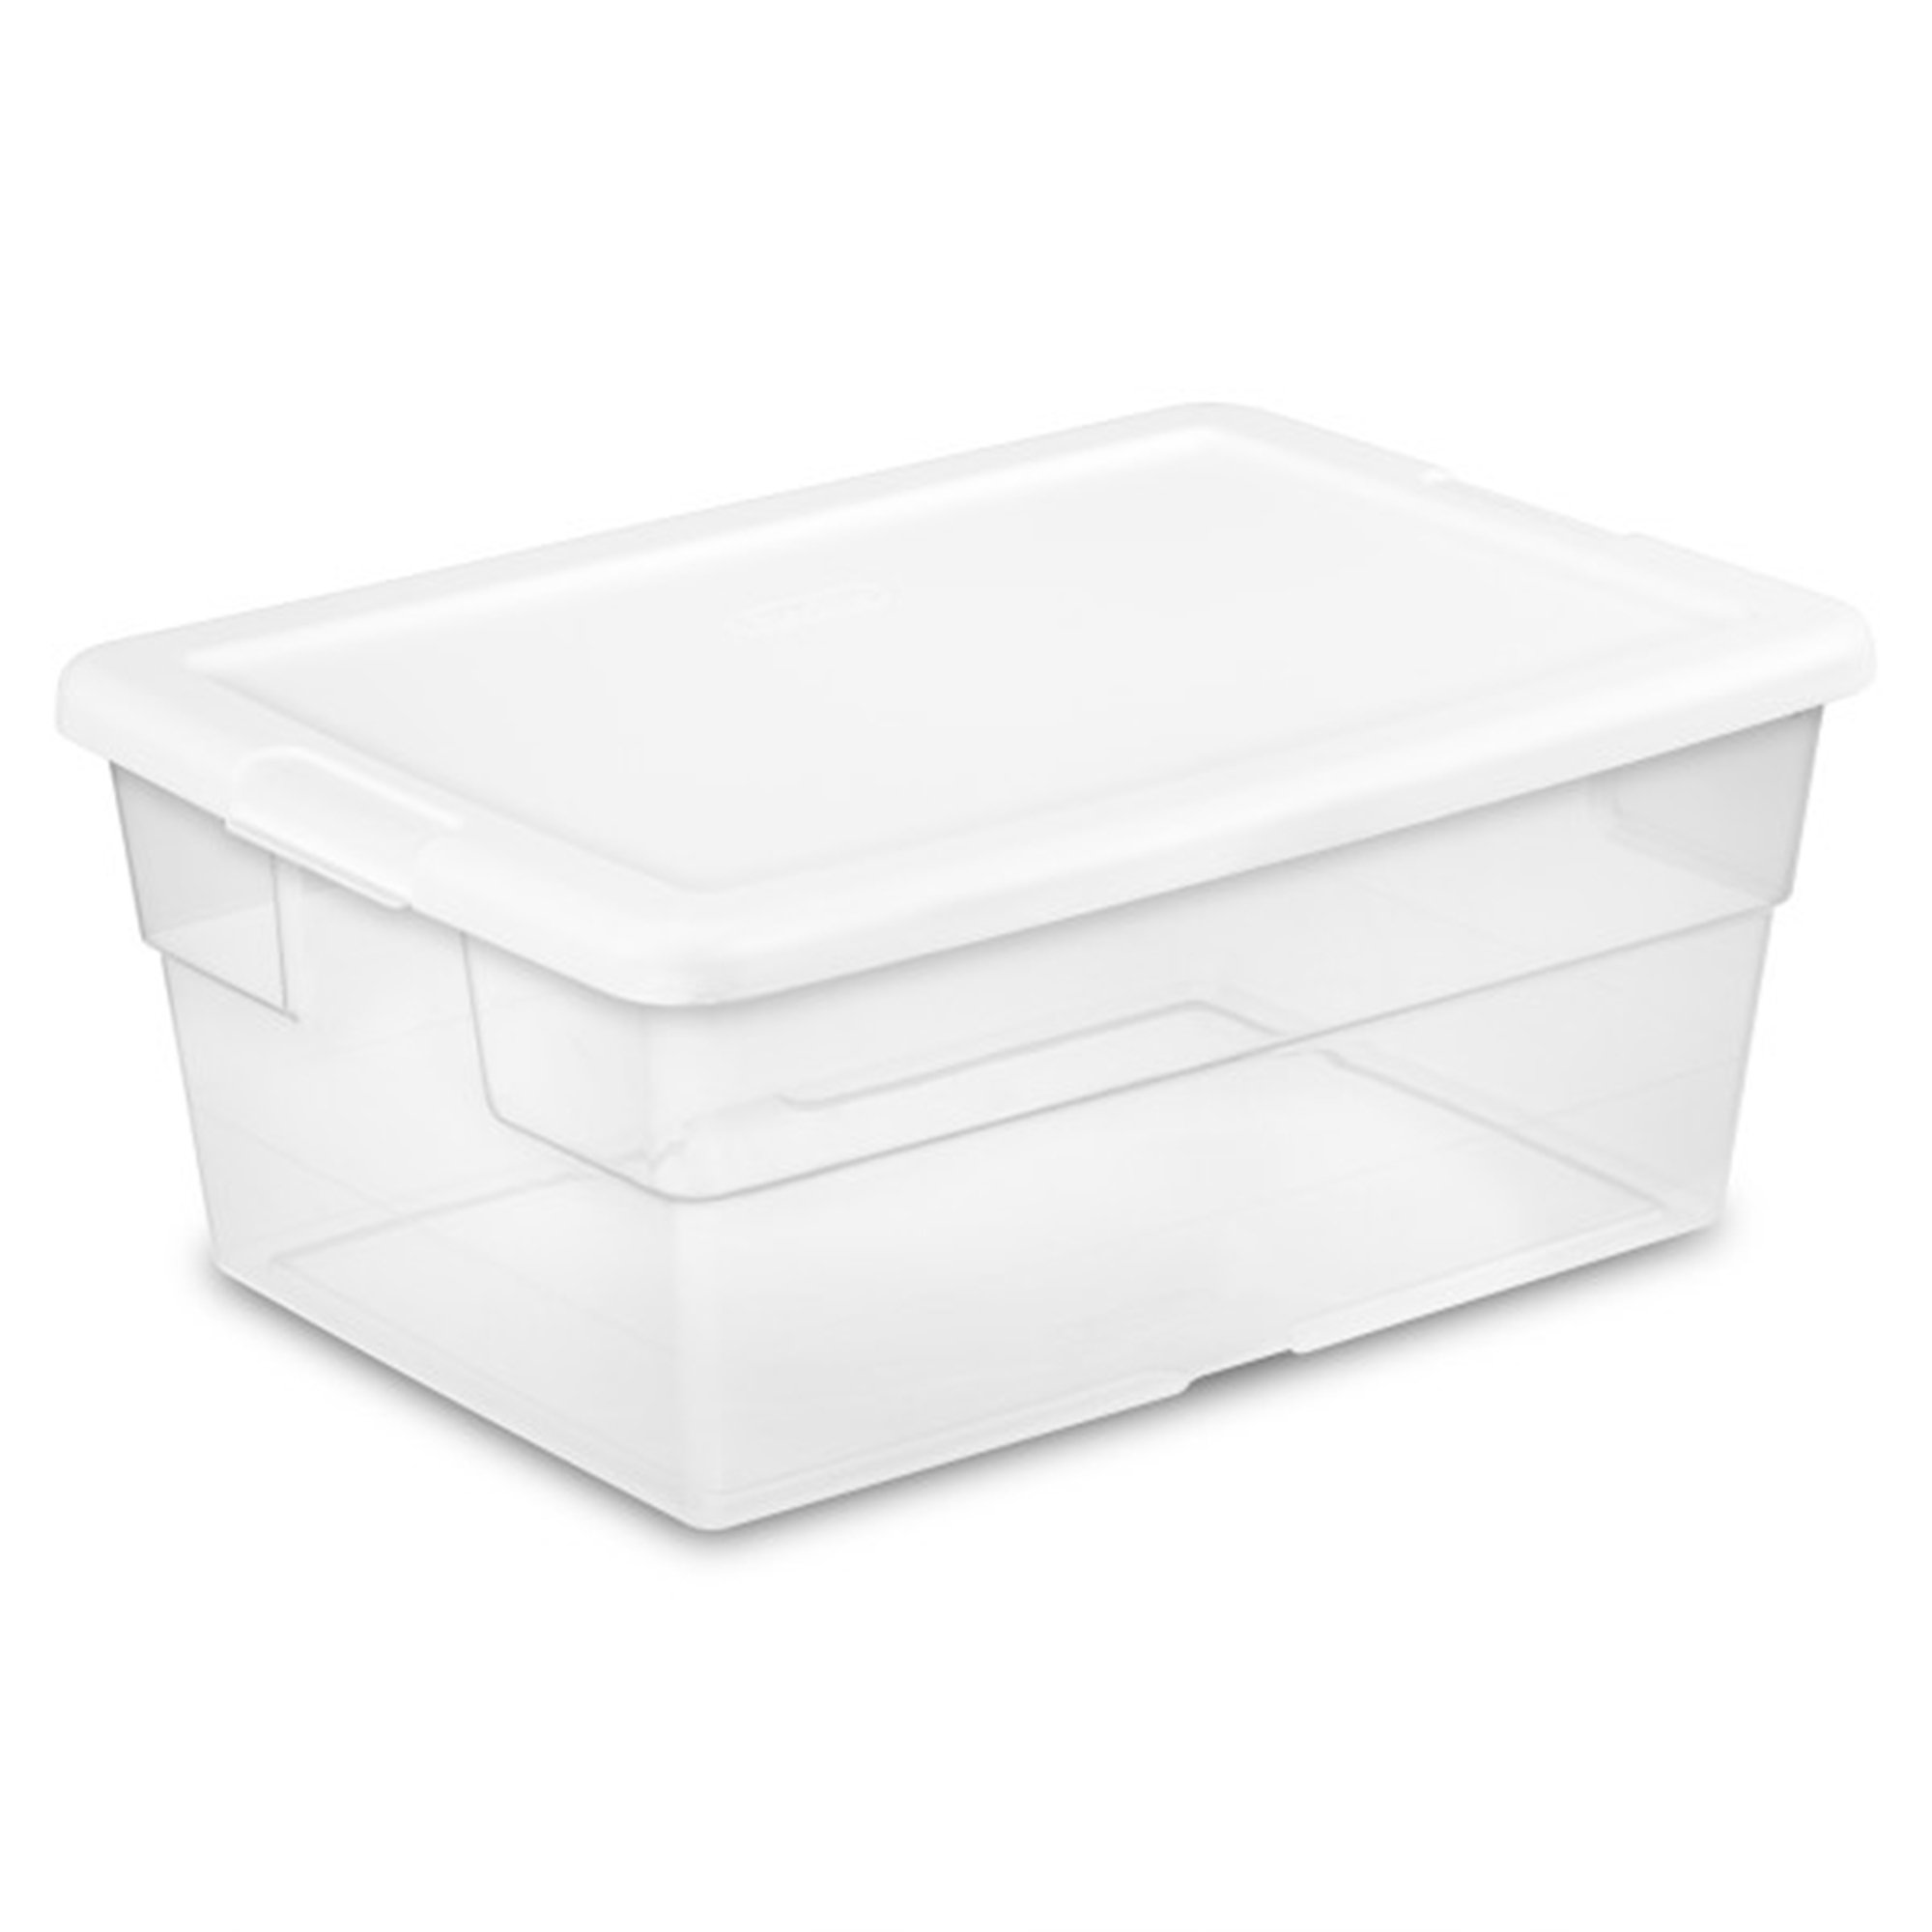 Sterilite 16 Quart Clear Plastic Stacking Storage Container Box (48 Pack)